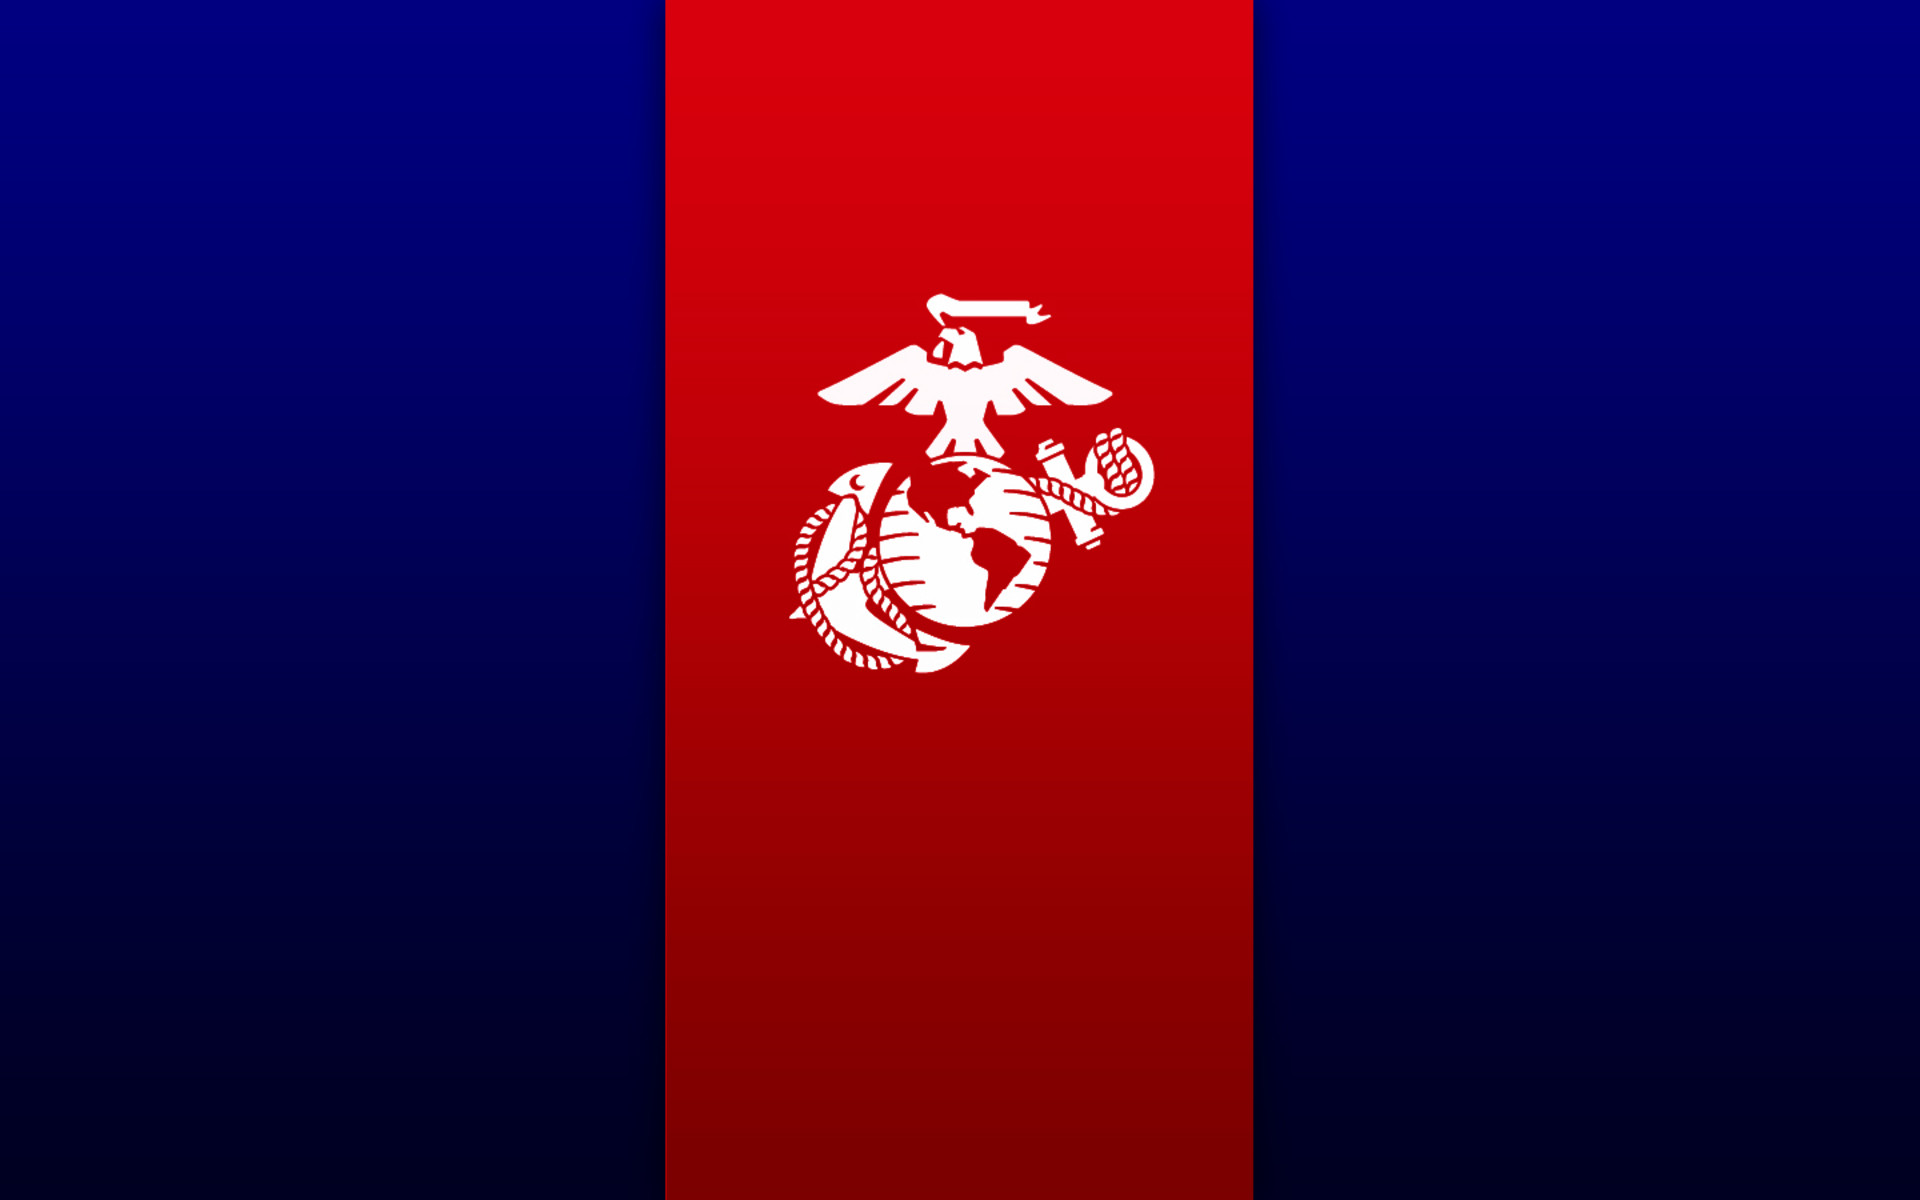 1920x1200  1920x1440 Px HD Desktop Wallpaper Wallpapers Usmc Red And Blue